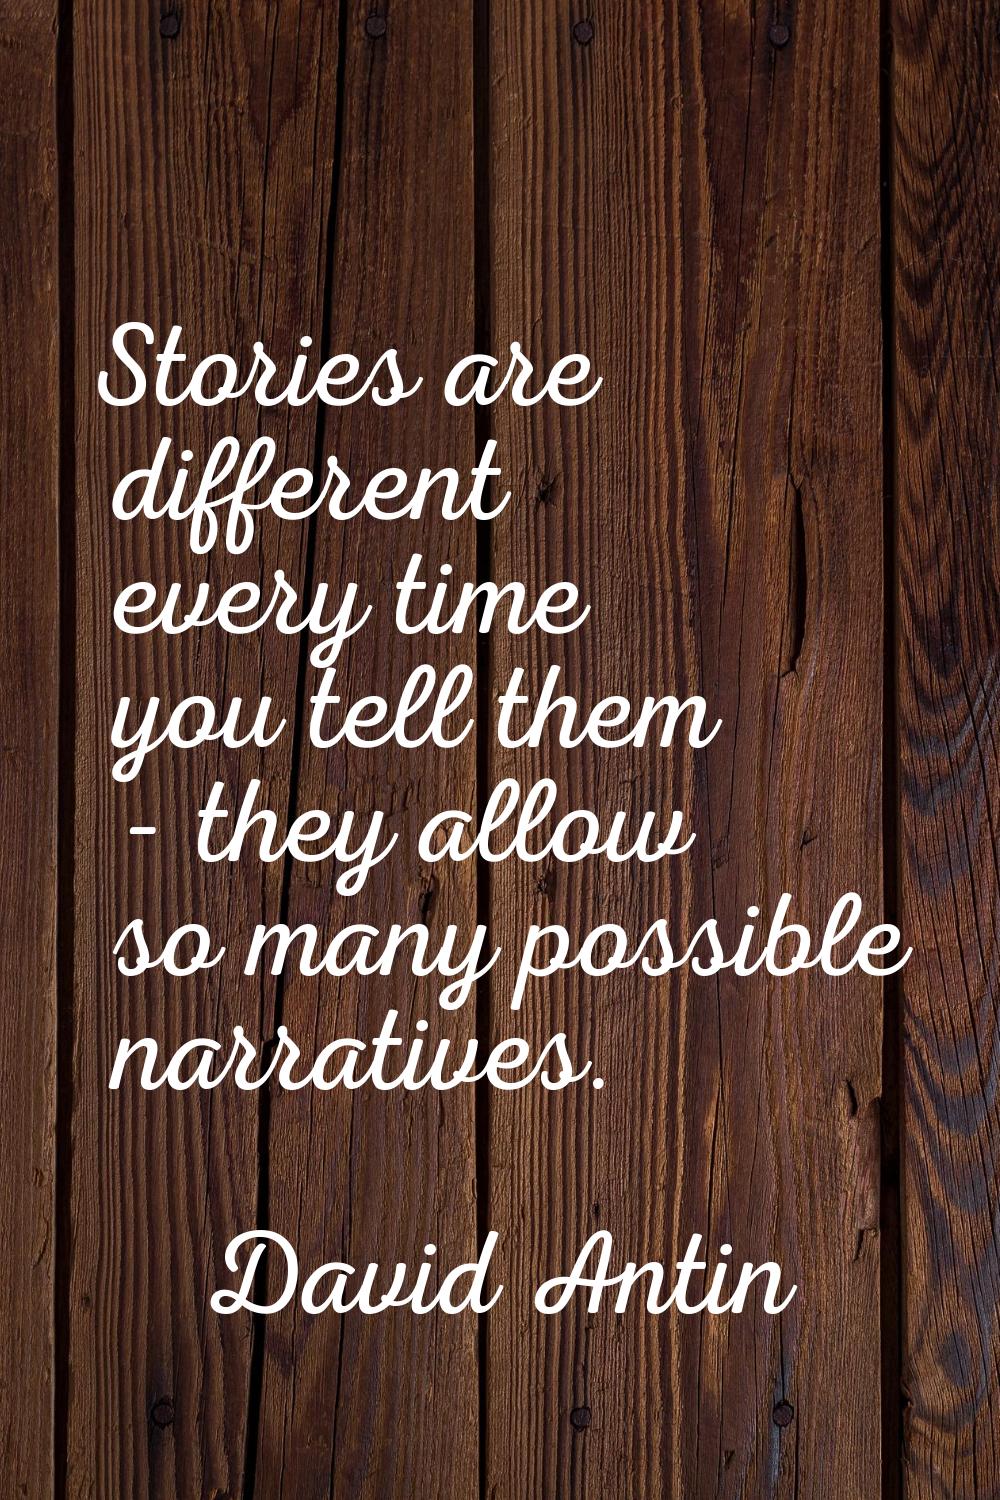 Stories are different every time you tell them - they allow so many possible narratives.